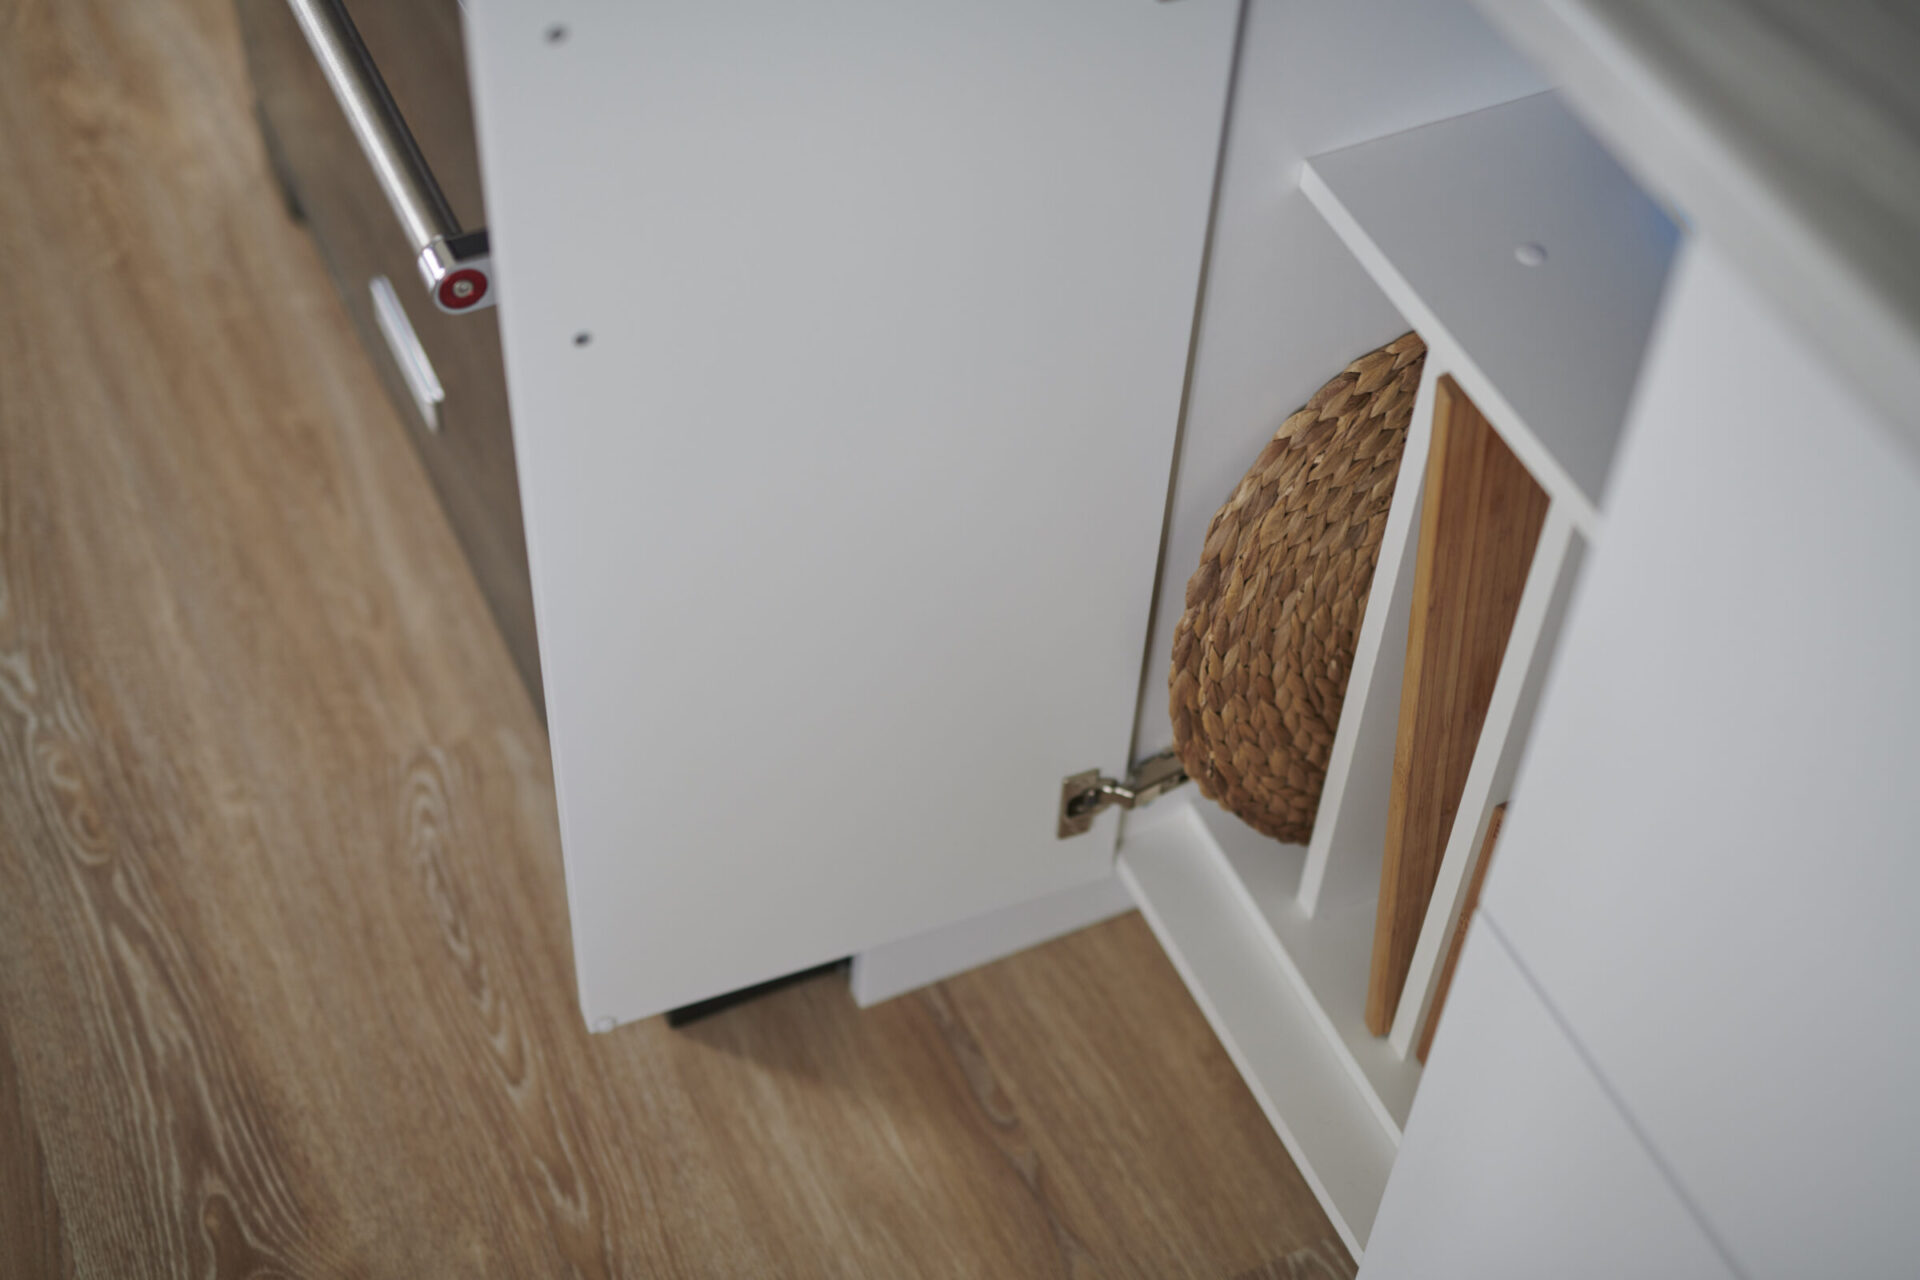 A partially open white kitchen cupboard with a metal handle, revealing a woven basket inside, against a wood laminate flooring background.